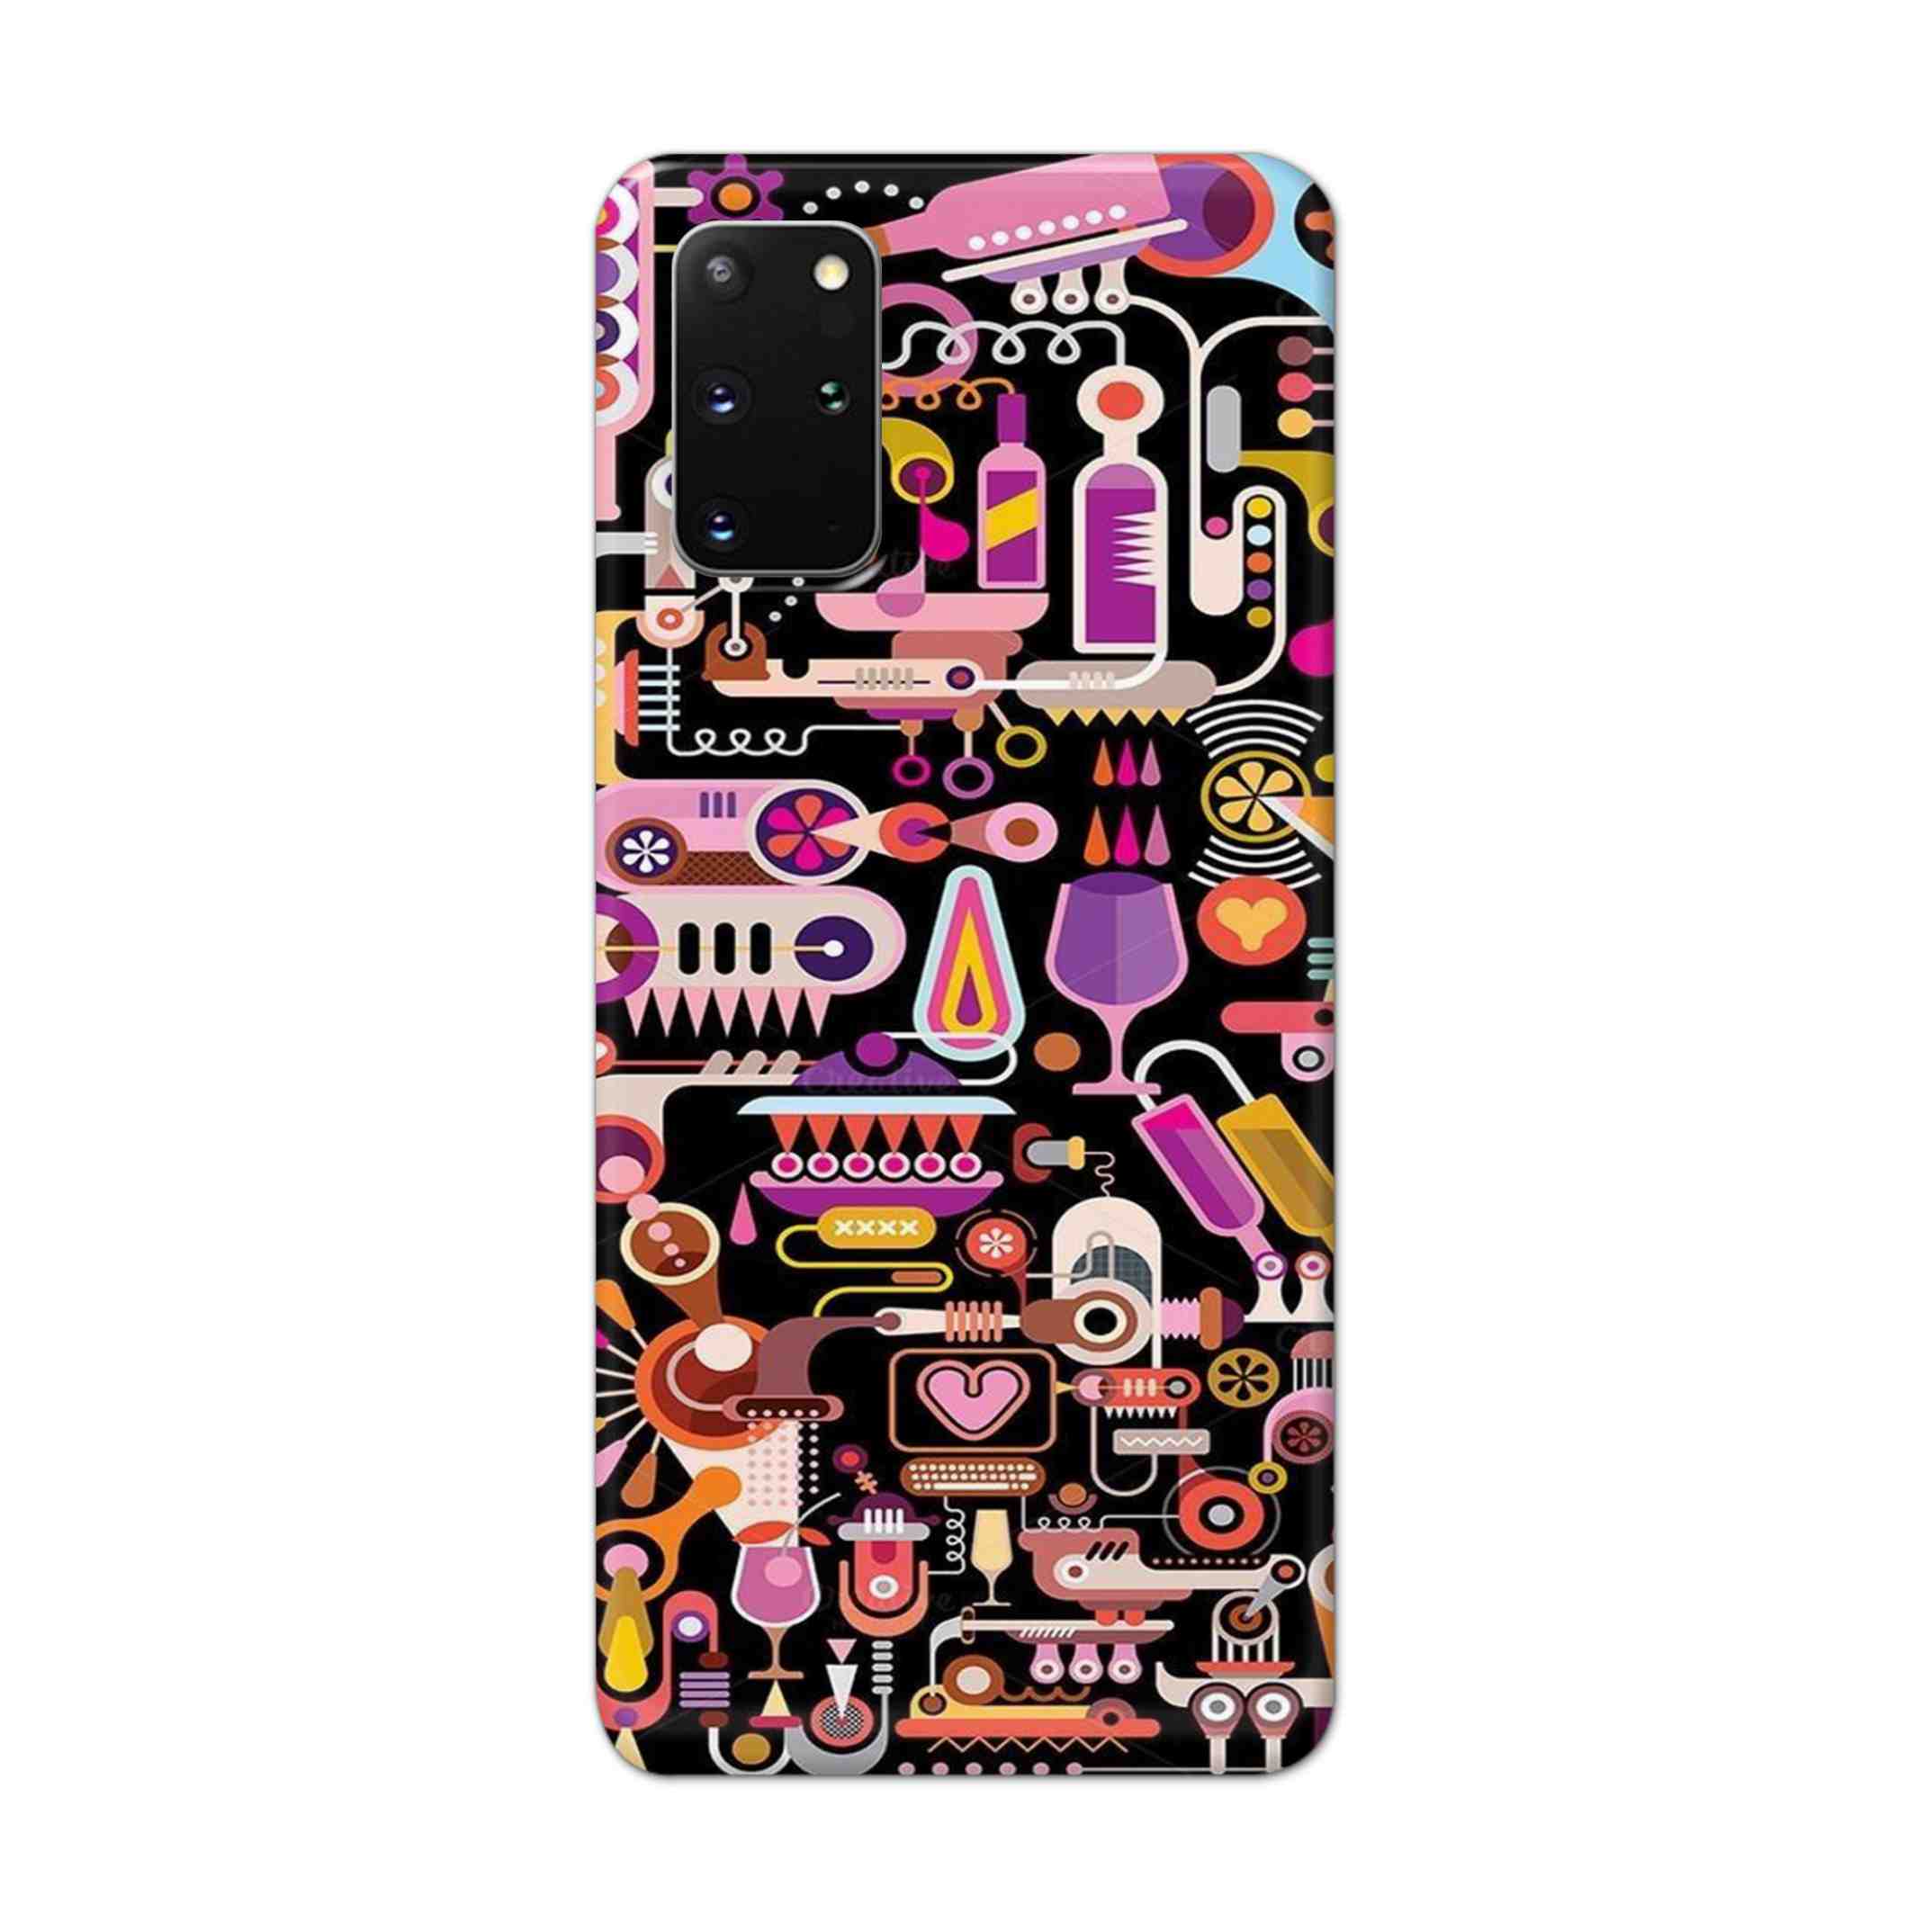 Buy Lab Art Hard Back Mobile Phone Case Cover For Samsung Galaxy S20 Plus Online